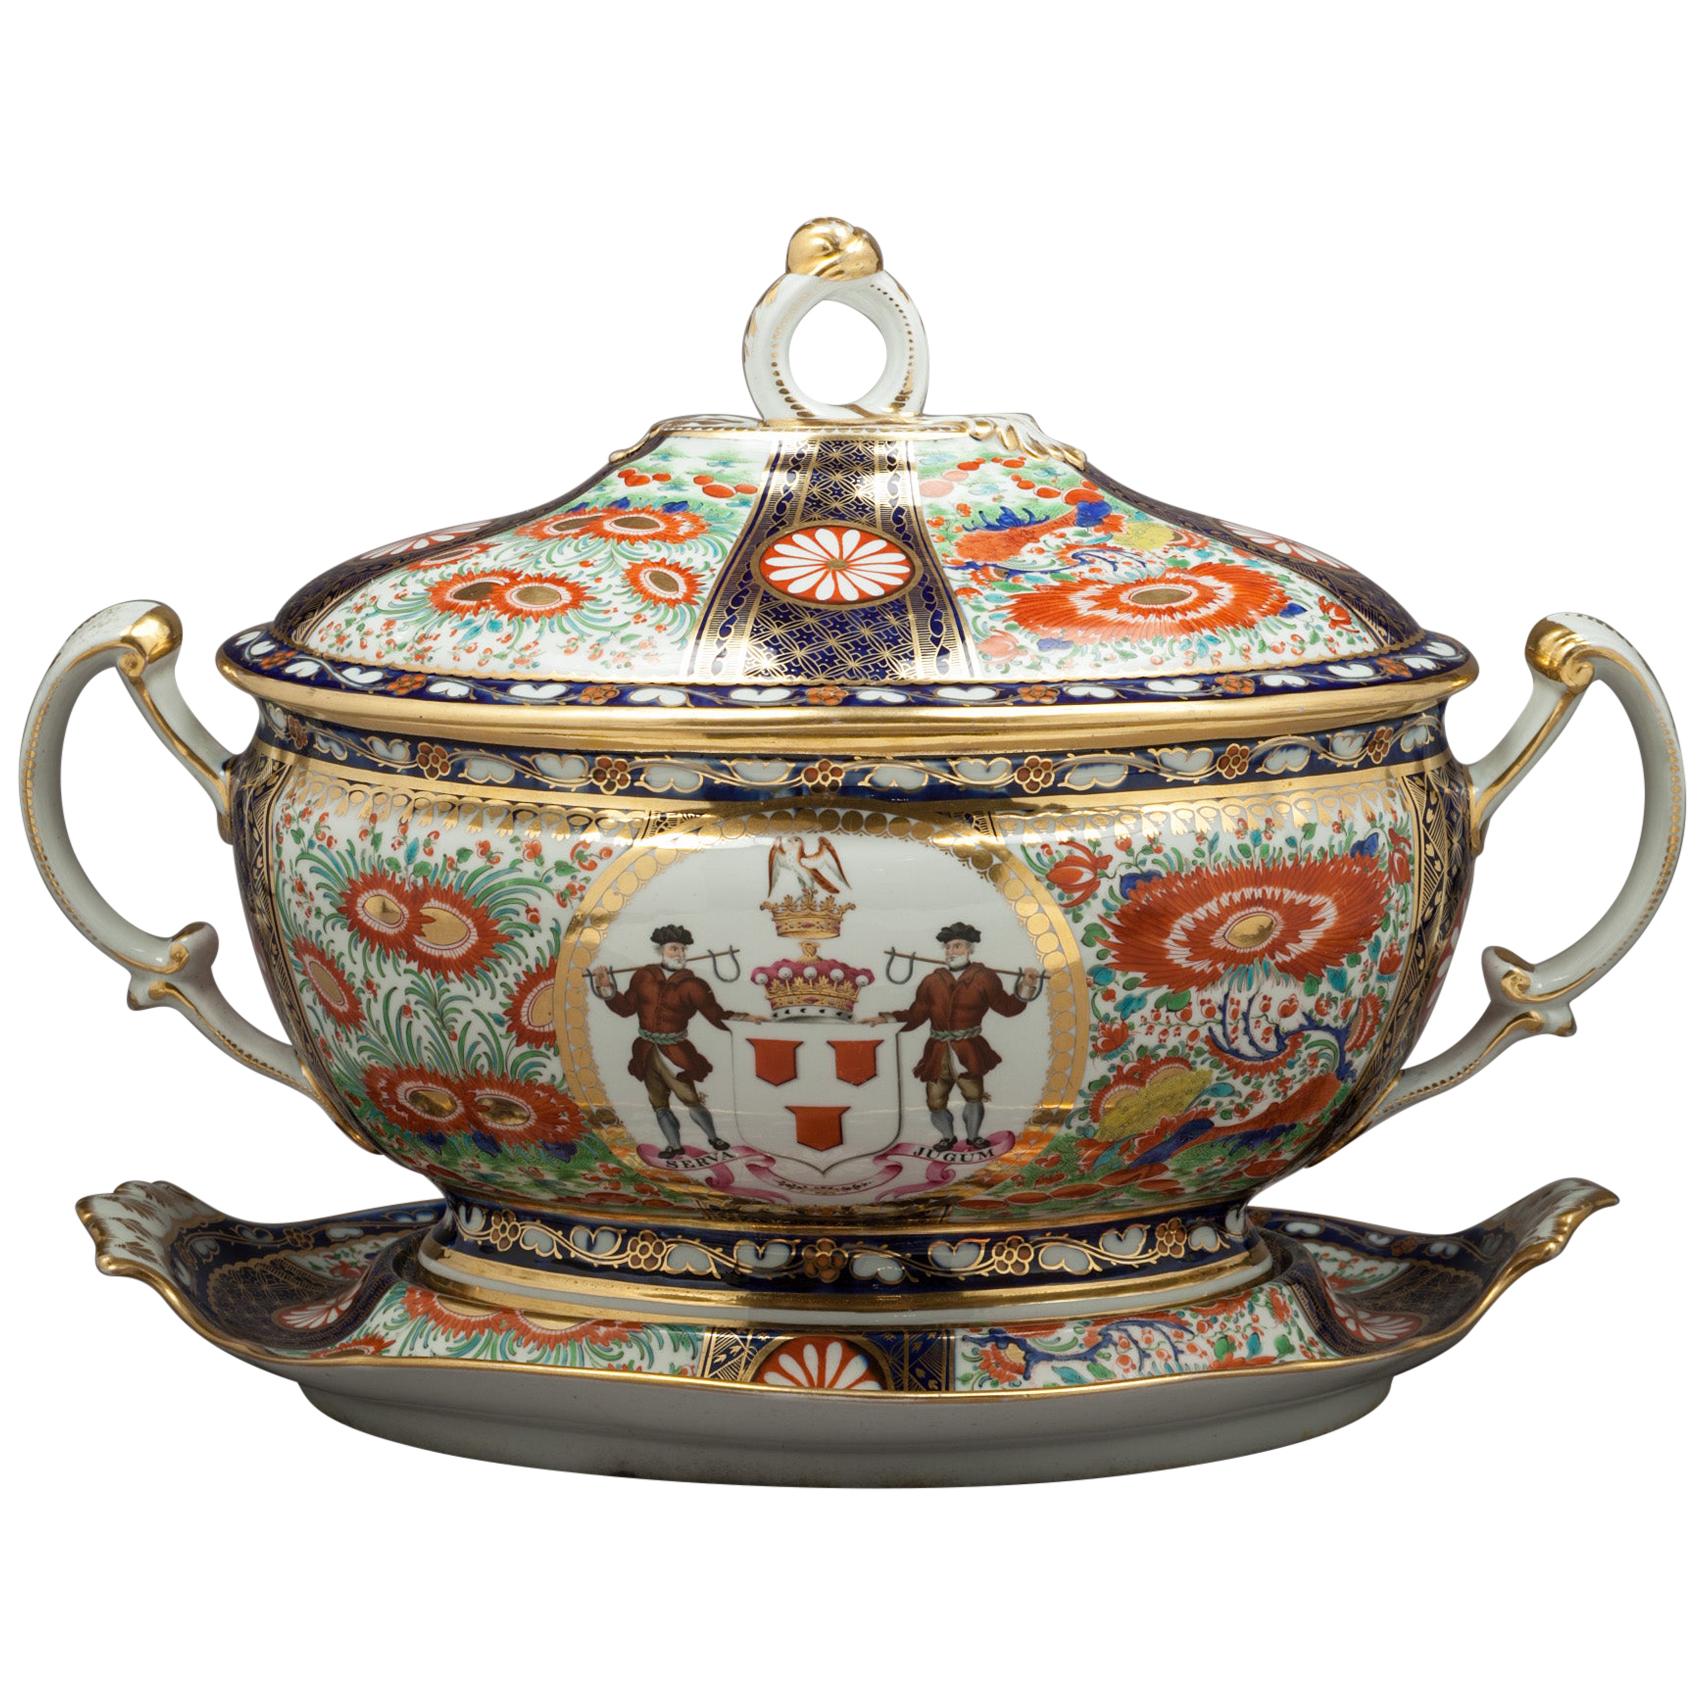 Rare Chamberlain's Worcester Covered Tureen on Stand, circa 1820